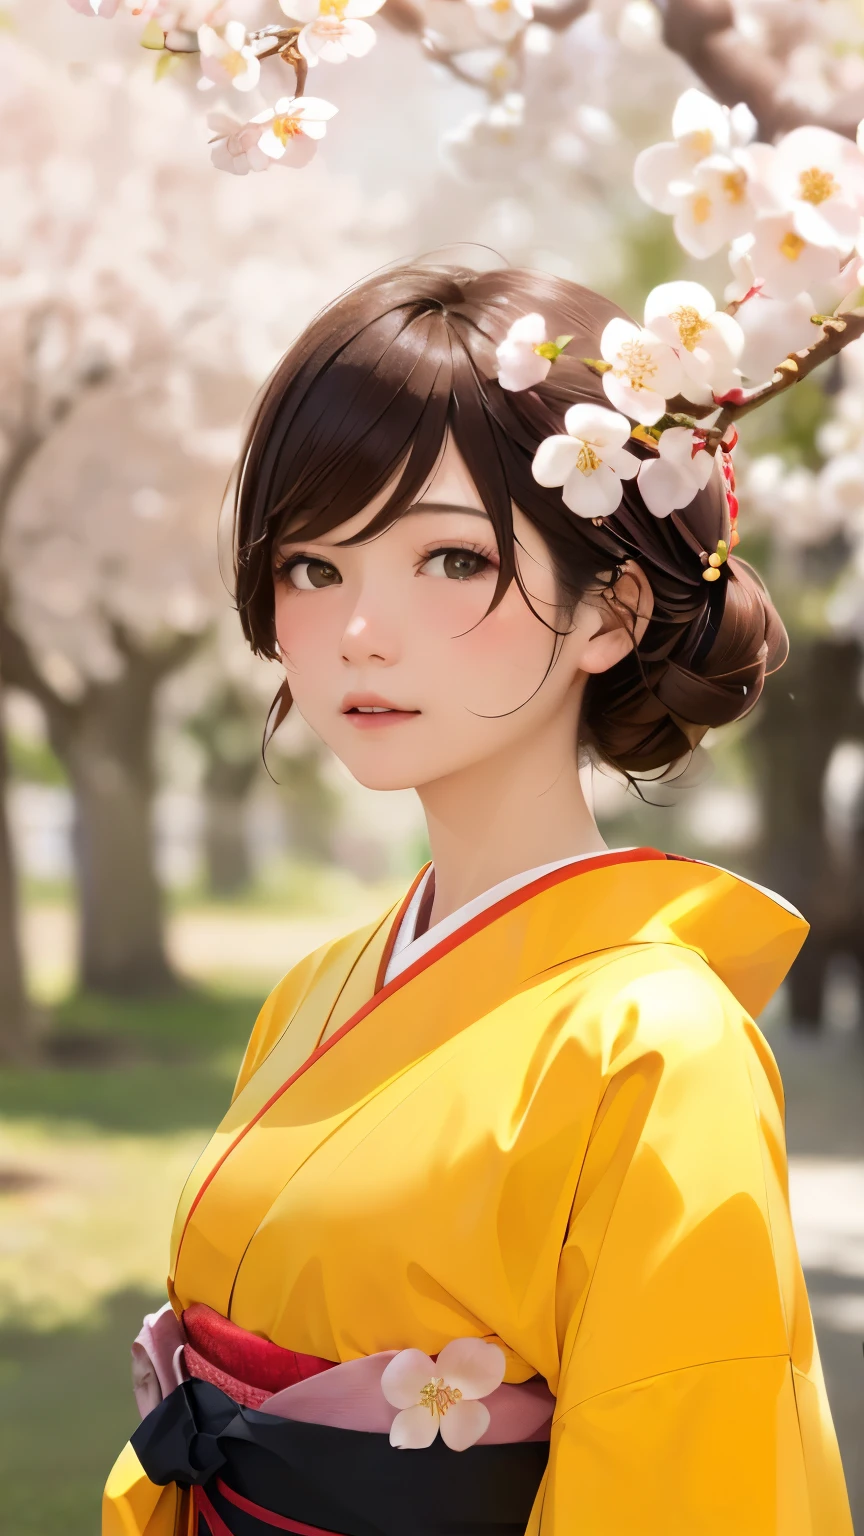 (kimono)、Japanese clothing、(highest quality,masterpiece:1.3,超A high resolution,),(Super detailed,caustics),(Photoreal:1.4,RAW shooting,)ultra-realistic capture,very detailed,High resolution 16K suitable for human skin、 natural skin texture、、Skin tone looks even and healthy、 Use natural light and color,one woman,Japanese,,cute,beautiful silky brown hair,middle hair,(Depth of written boundary、chromatic aberration、wide lighting range、natural shading、)、(hair swaying in the wind:1.3)、(Cherry tree in full bloom:1.3)、Yoshino cherry tree、The beautiful city of Kyoto